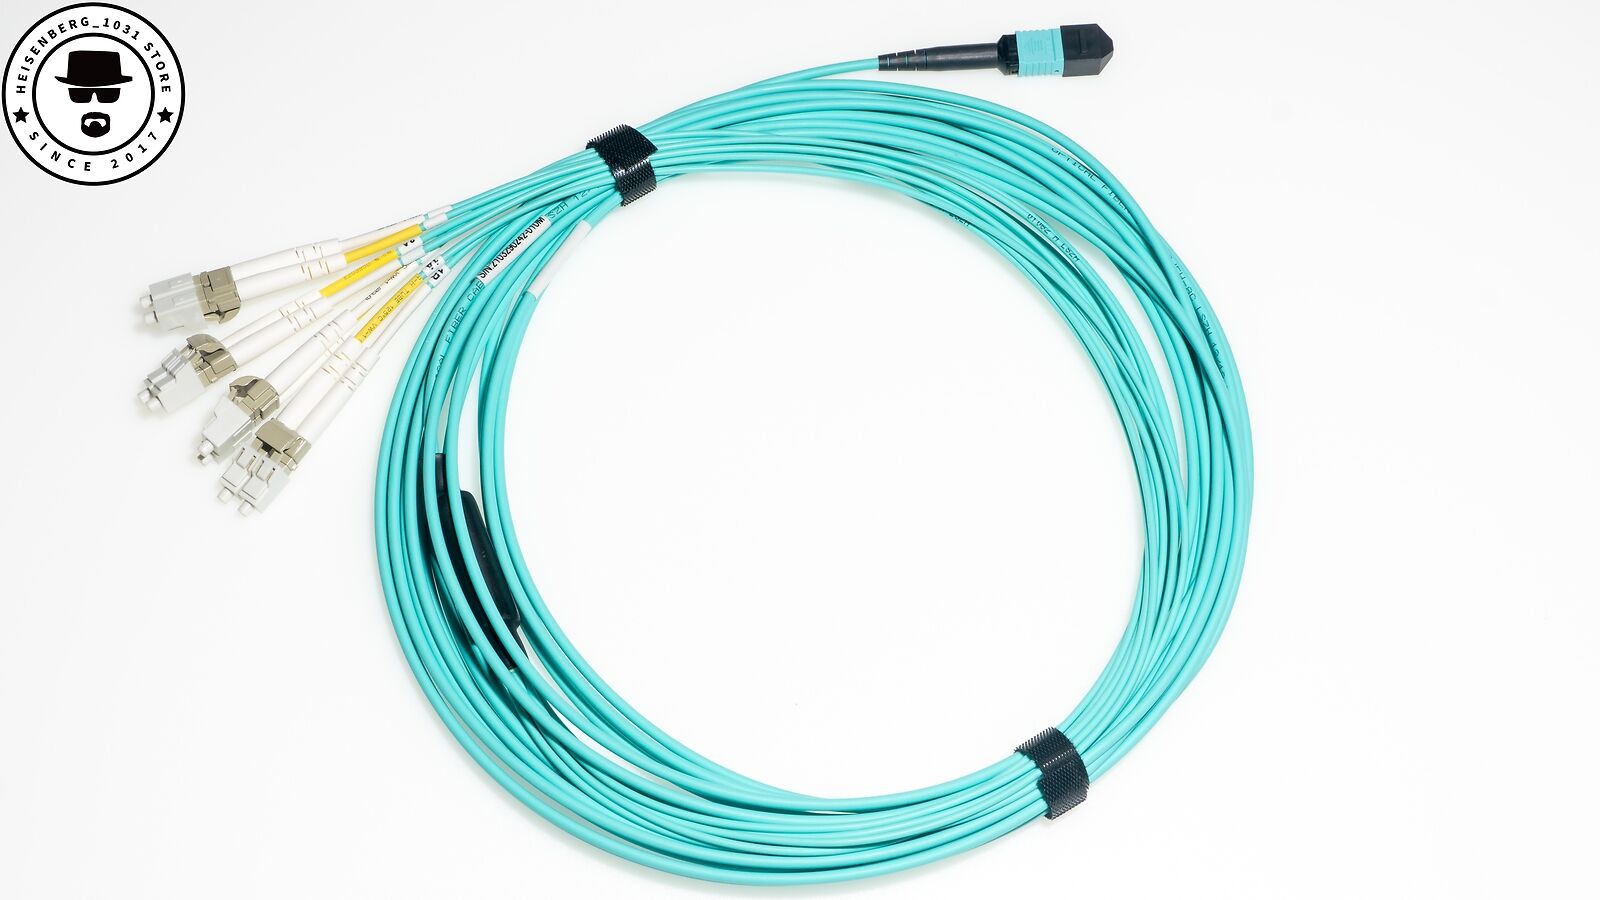 QSFP MPO/MTP 8F to 4x LC Fiber Optic Breakout Cable Multimode OM3 15m